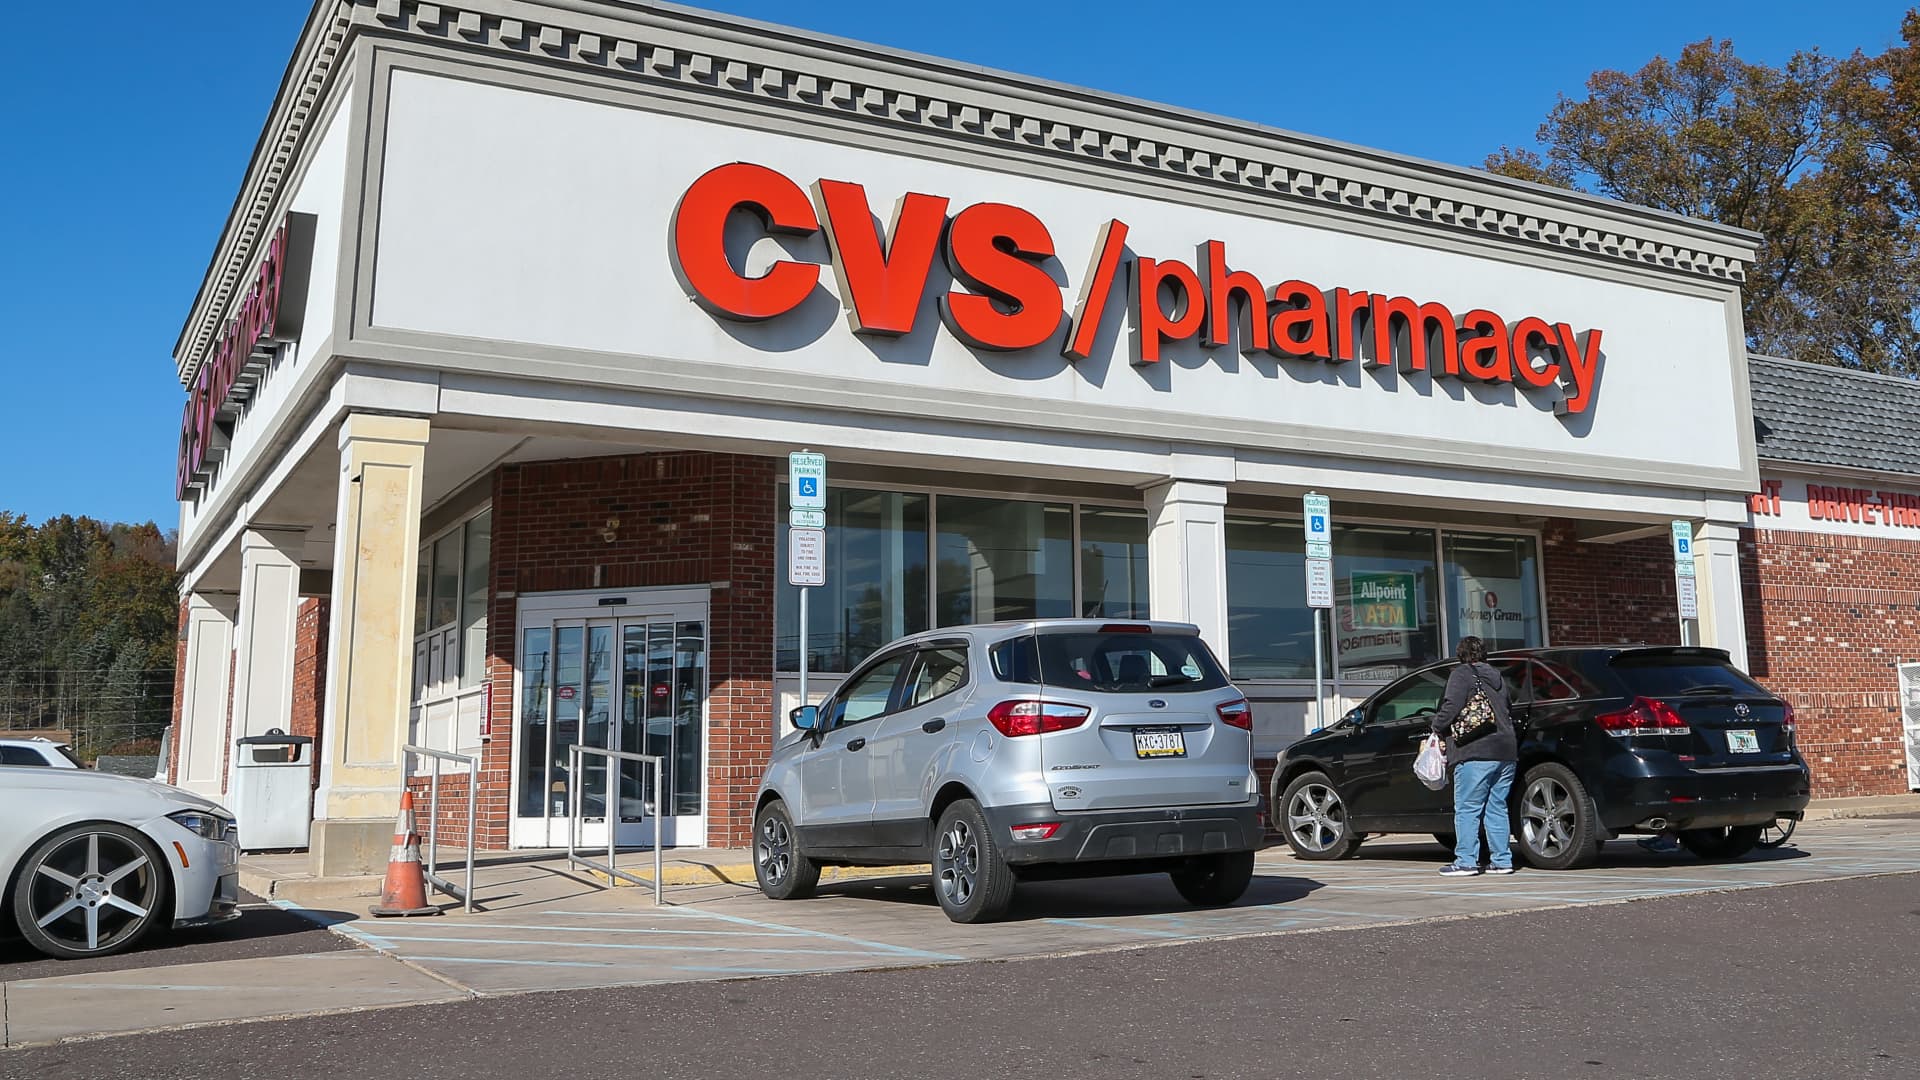 Stocks making the biggest moves midday: Walmart, CVS Health, Wolfspeed